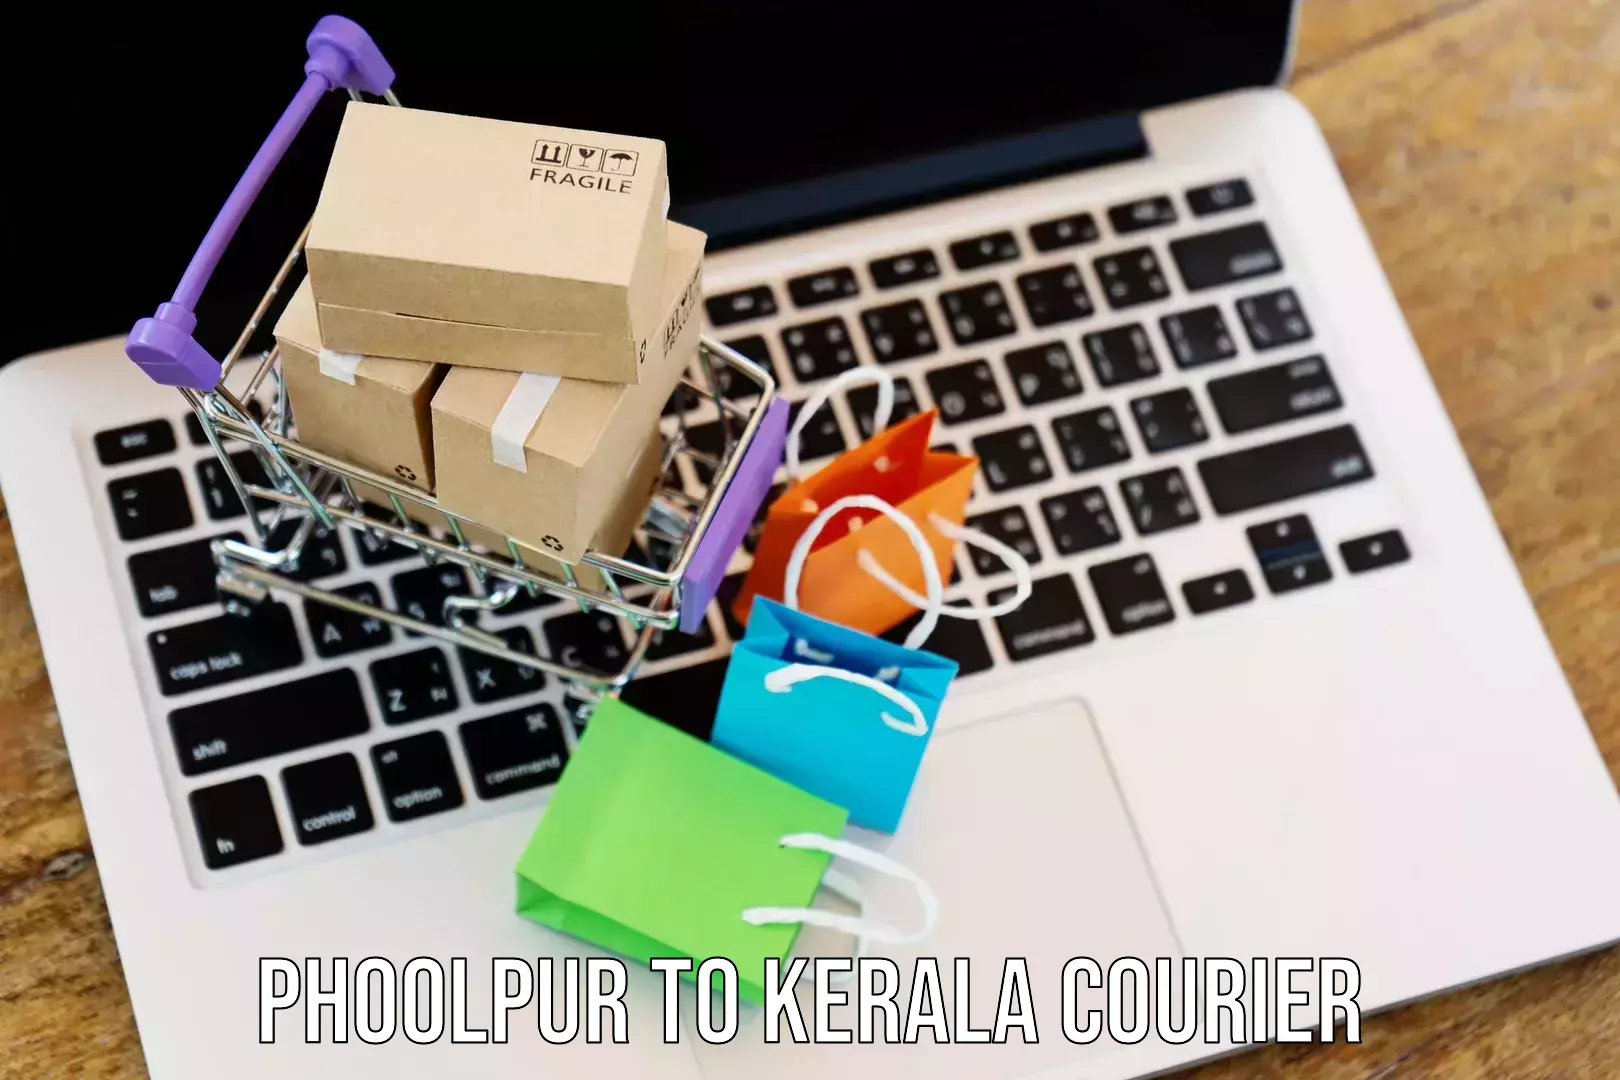 Next-generation courier services Phoolpur to Kerala